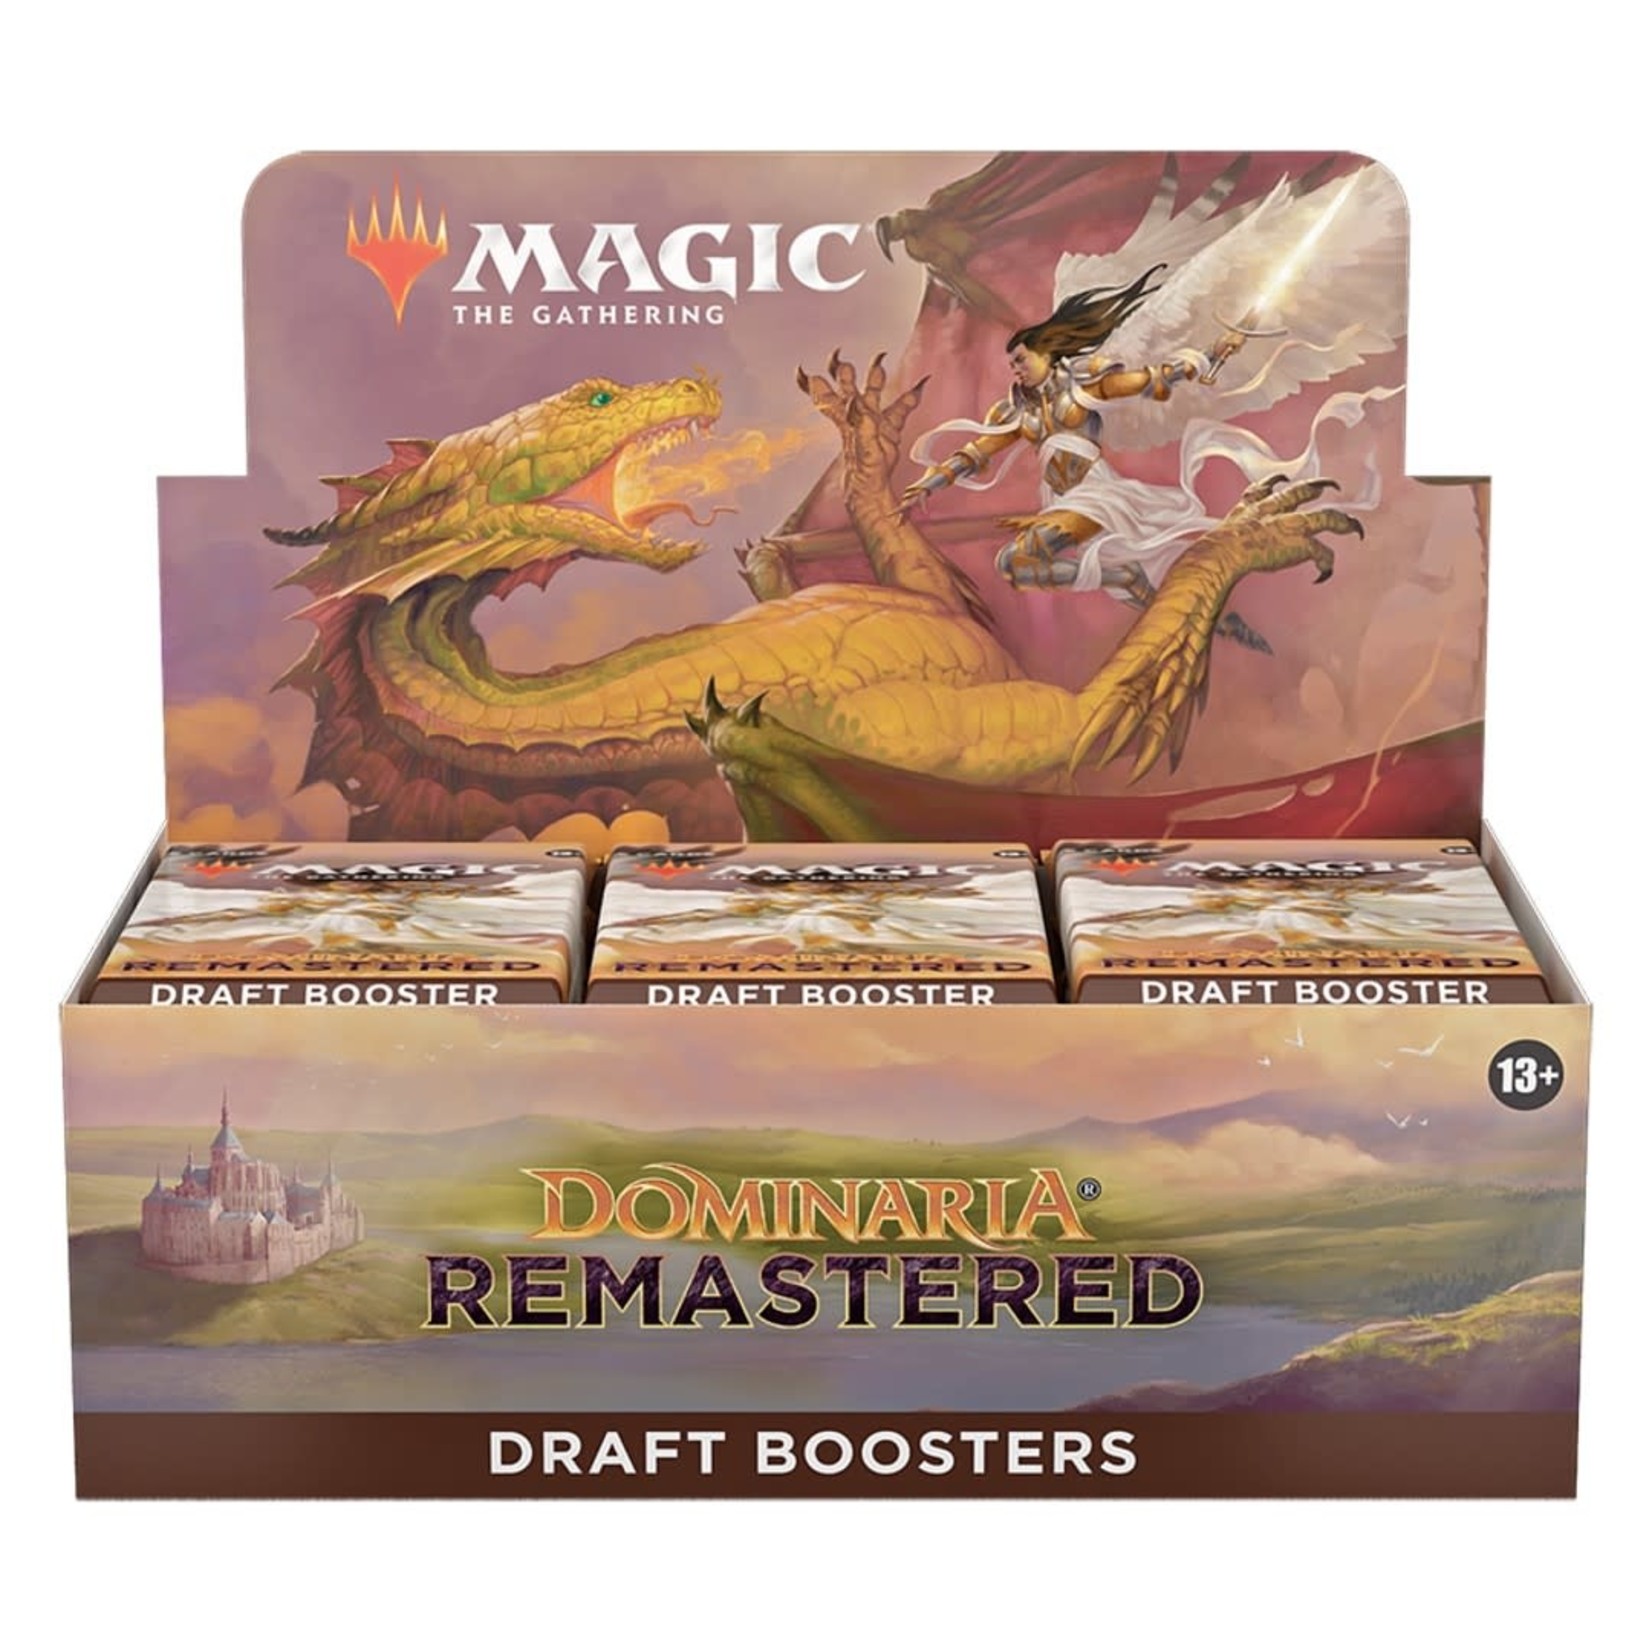 Wizards of the Coast Magic the Gathering Dominaria Remastered Draft Booster Box DMR